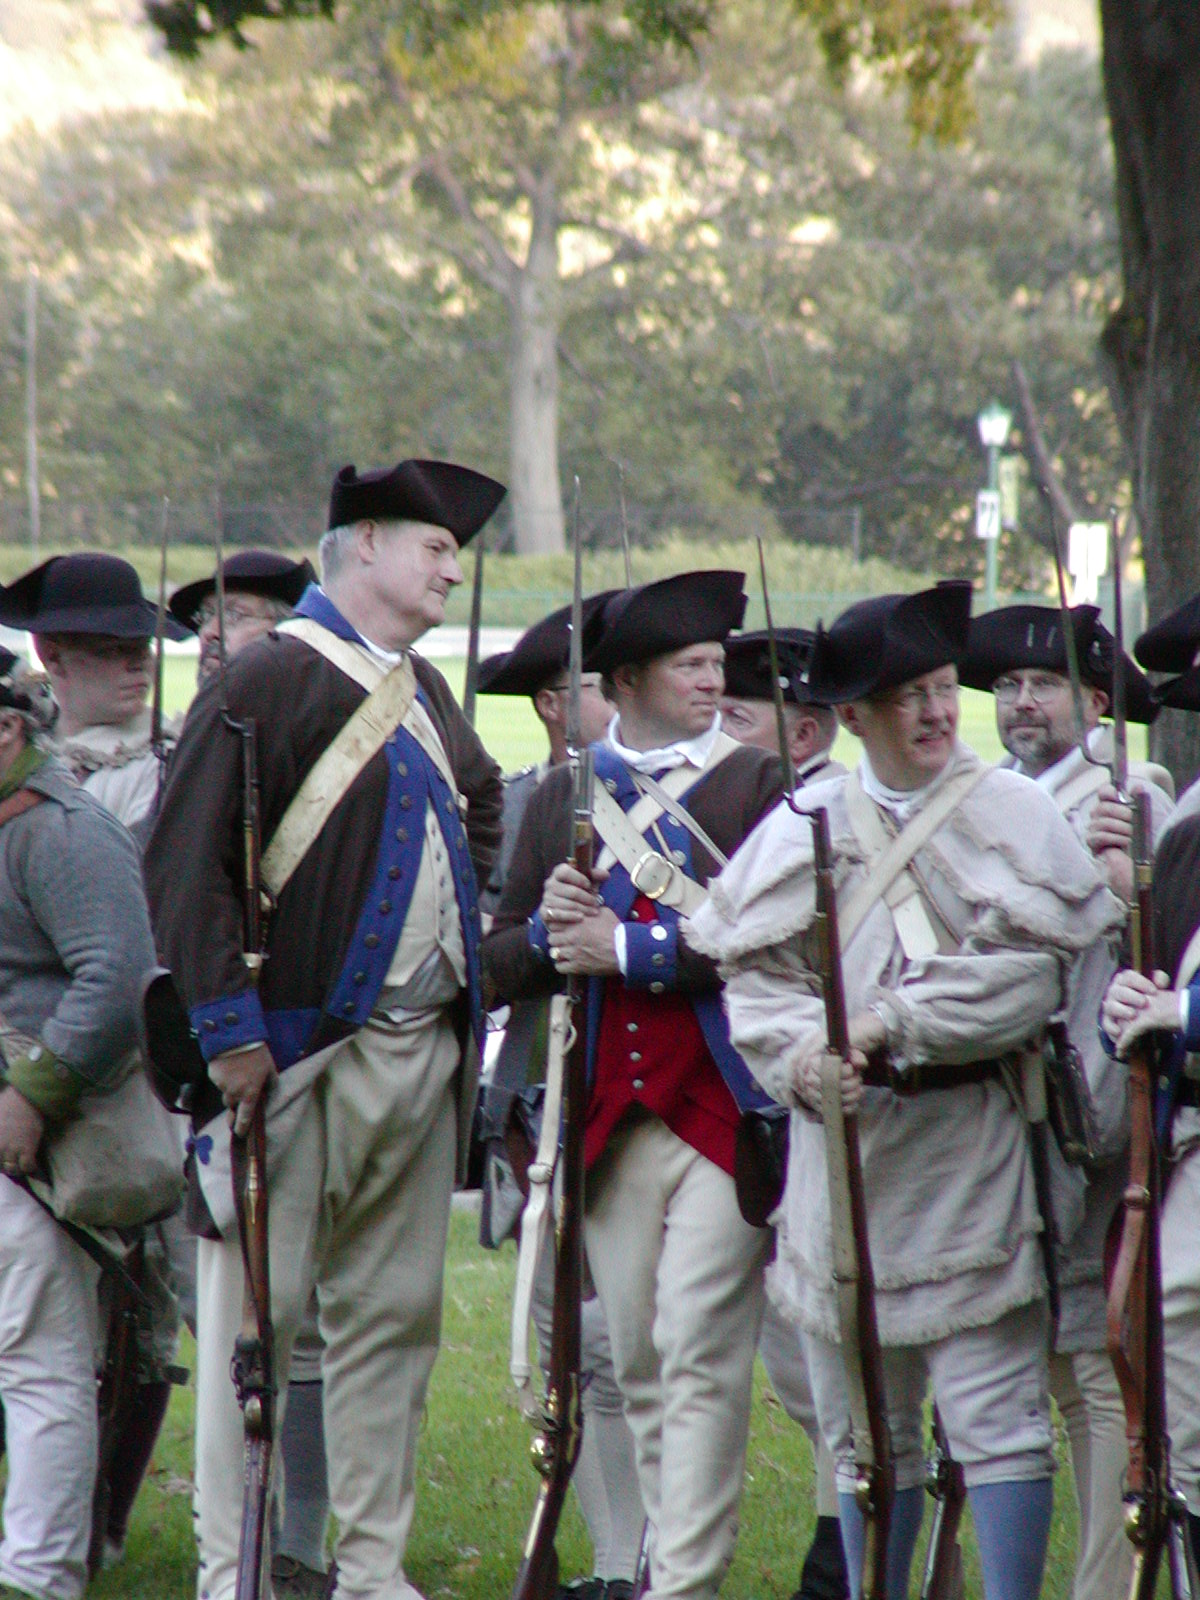 Photo of reenactors at Patriots' Weekend 2002 on the grounds of West Point. They are dressed as 18th c. Colonial troops and carry rifles with bayonets attached.